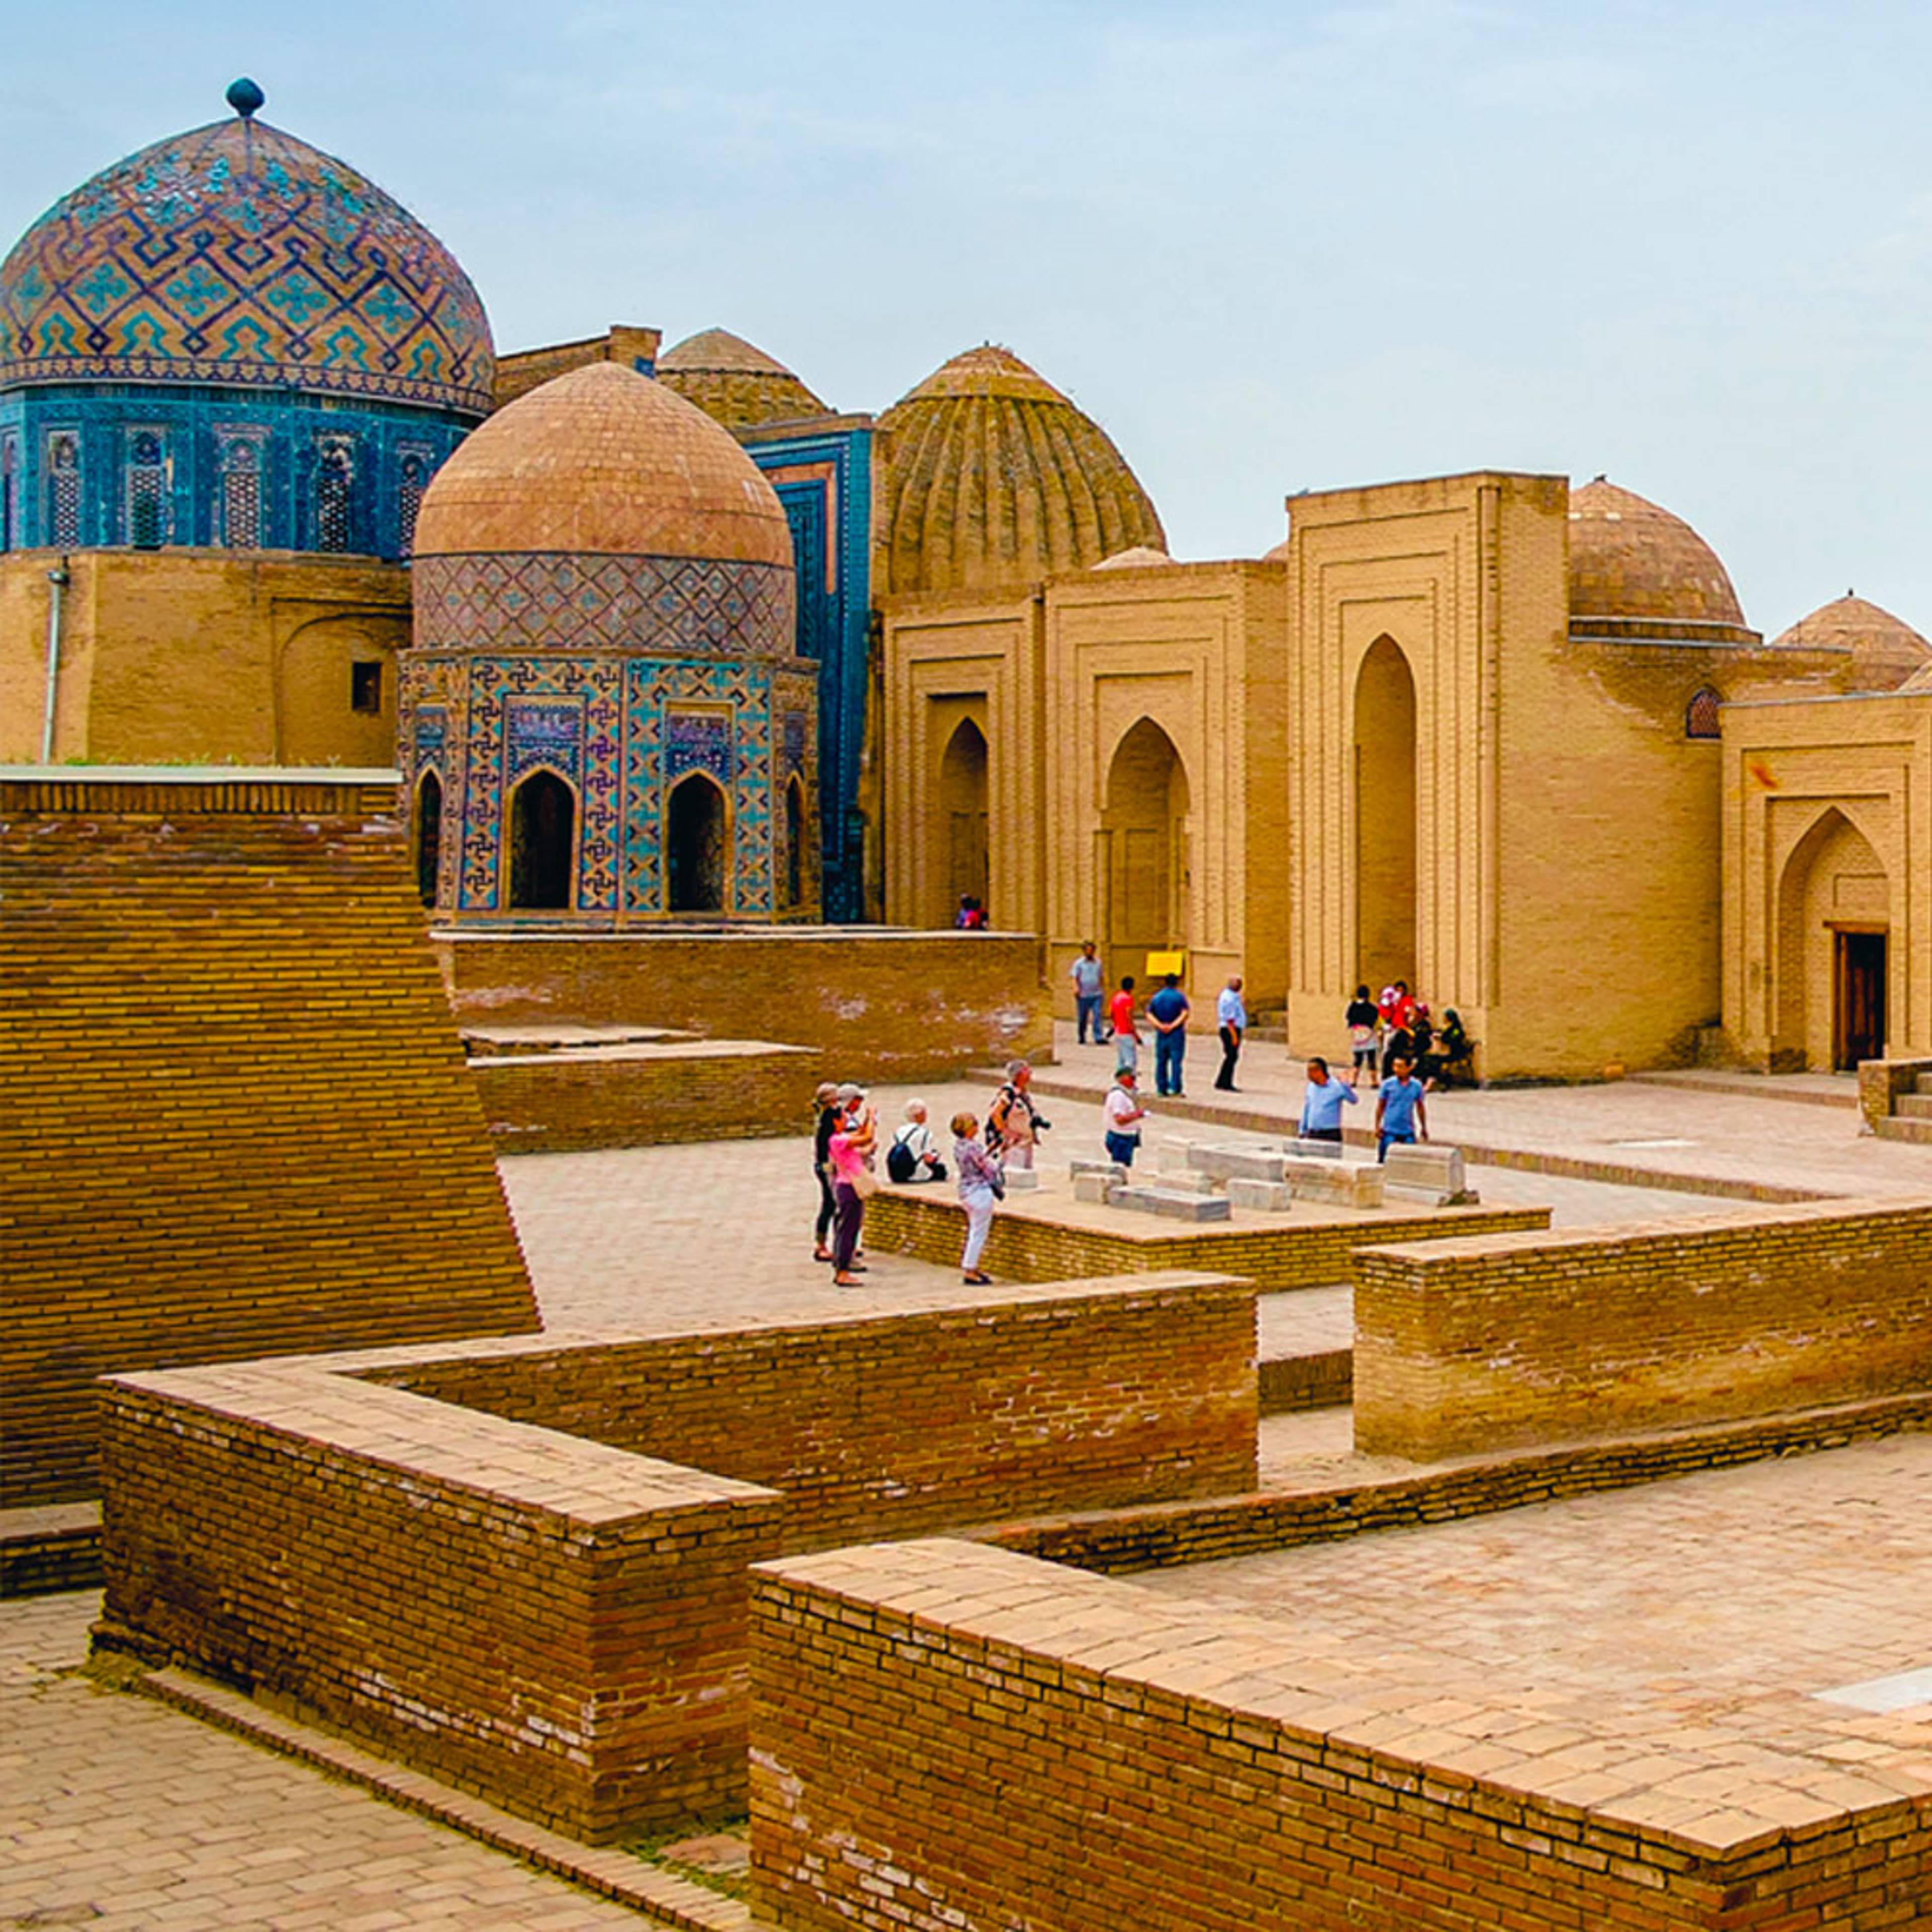 Design your perfect guided tour with a local expert in Uzbekistan